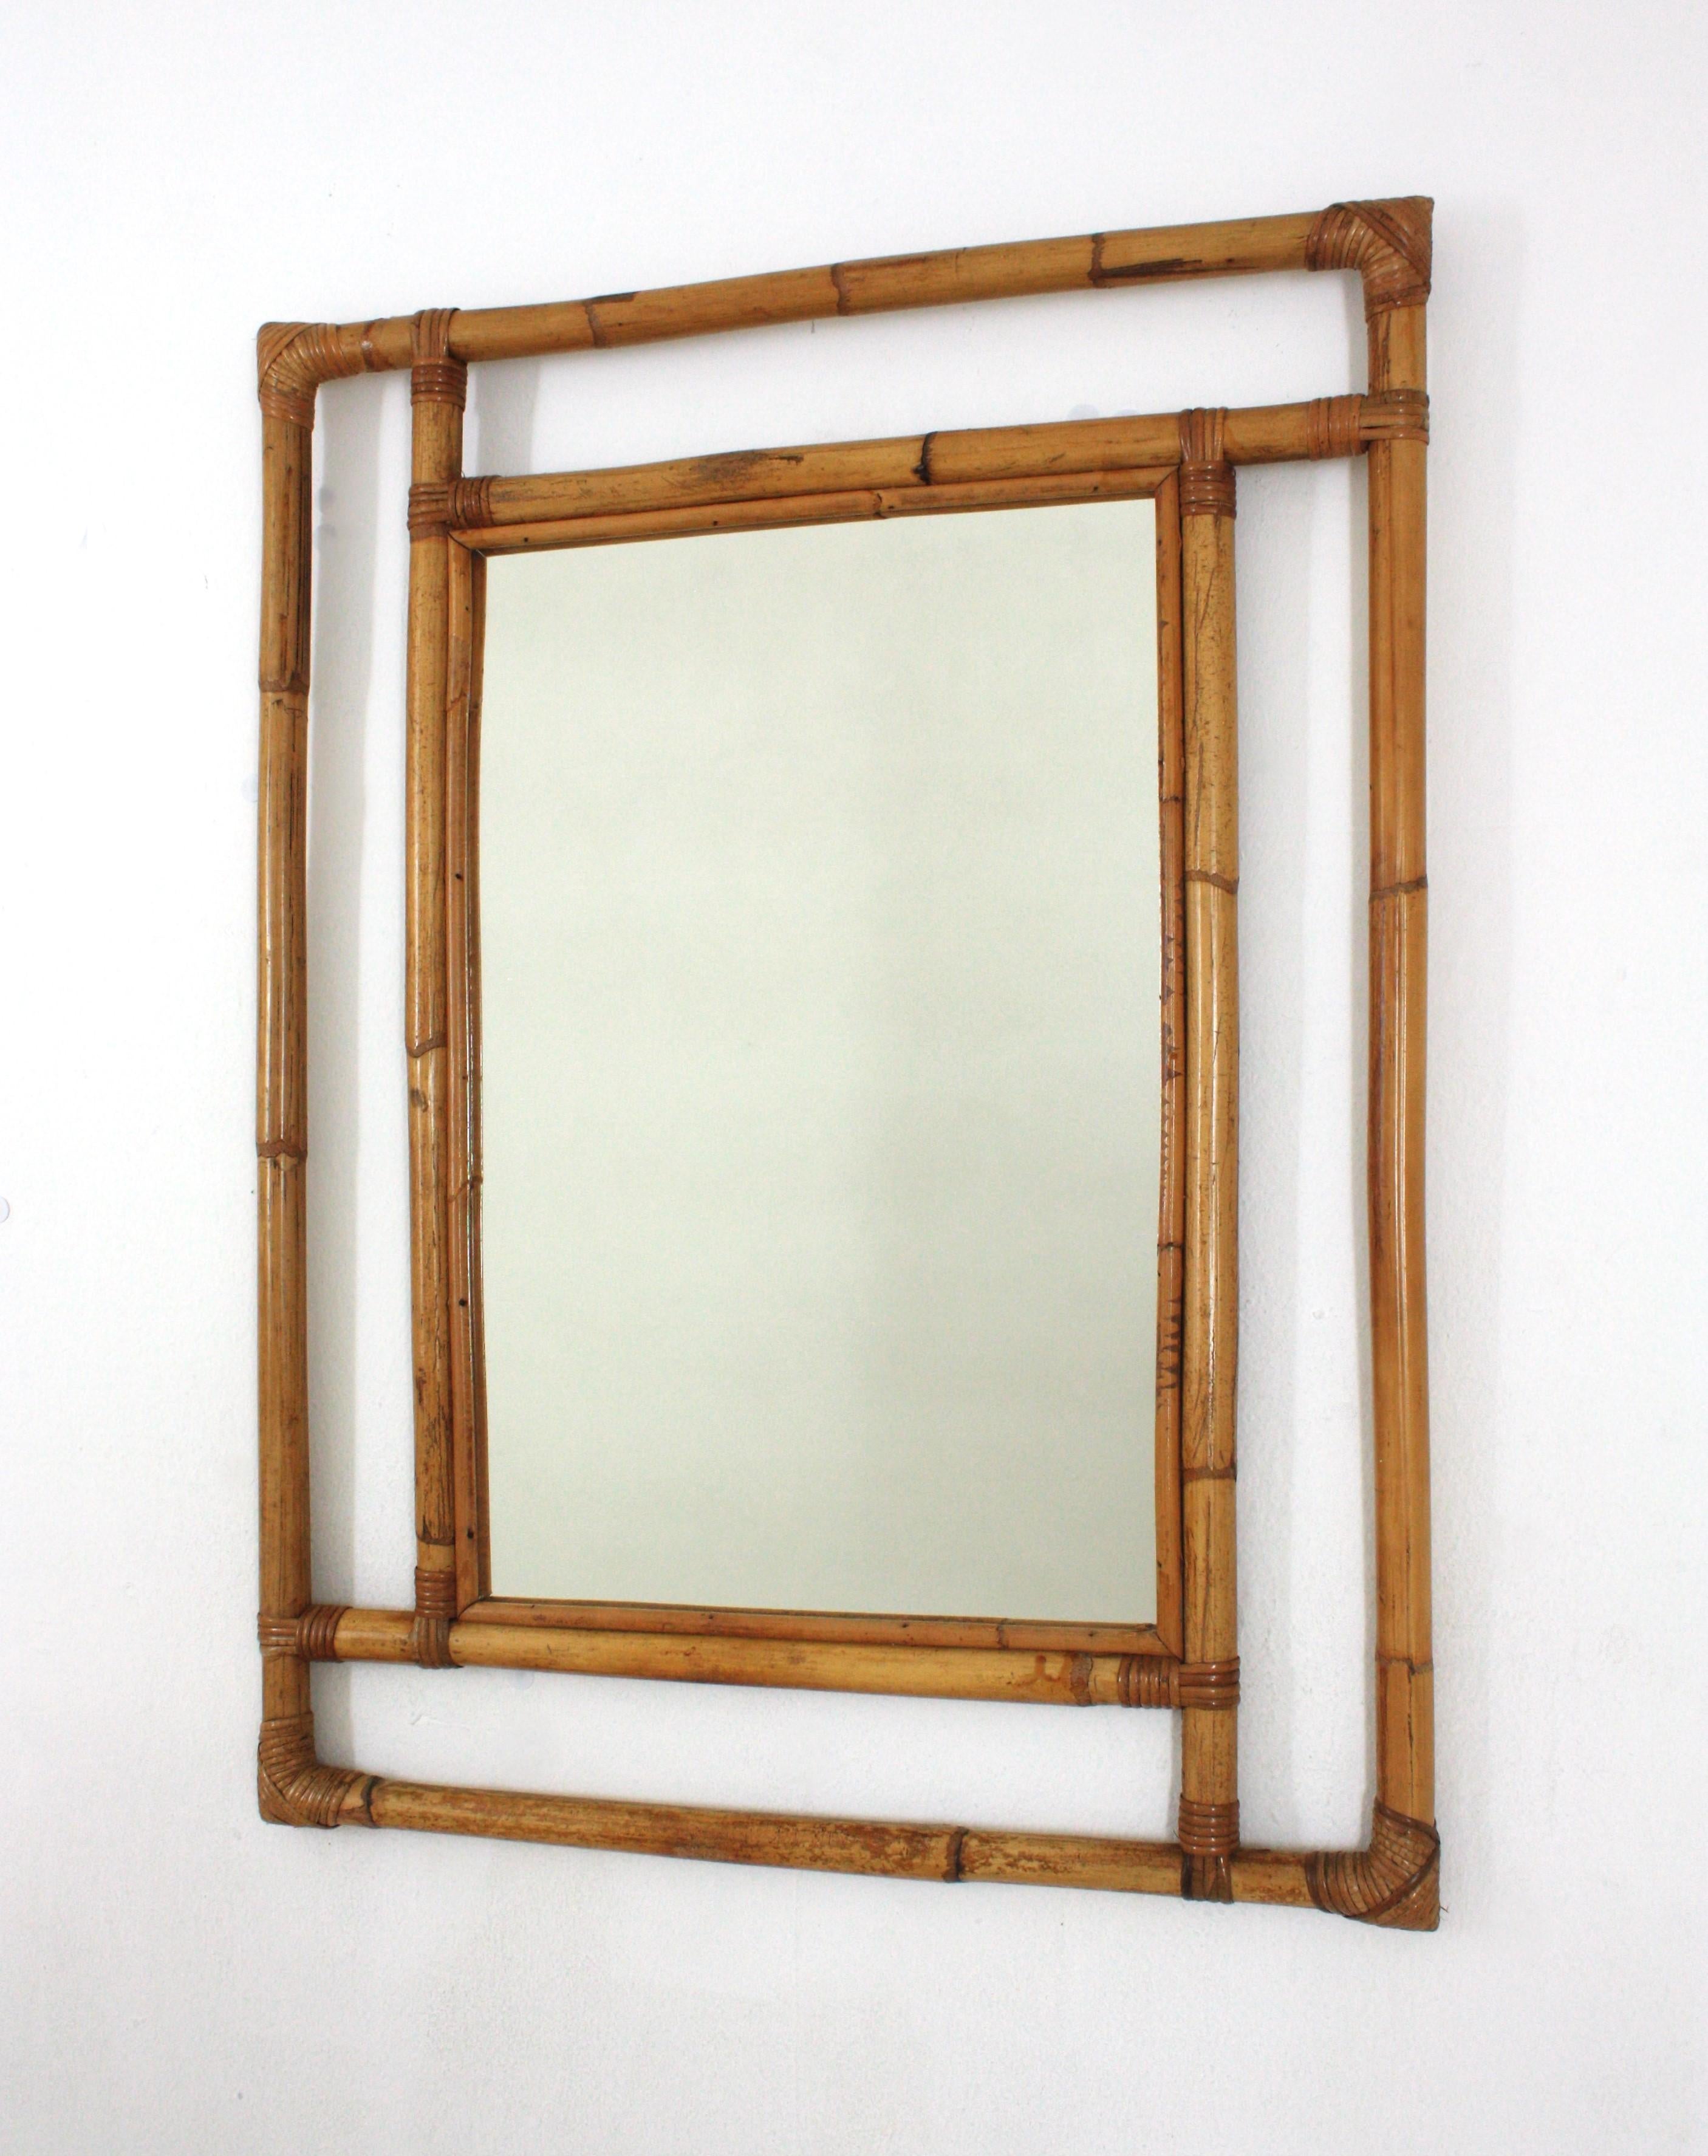 Spanish Large Rattan Rectangular Mirror with Geometric Frame, 1960s For Sale 1